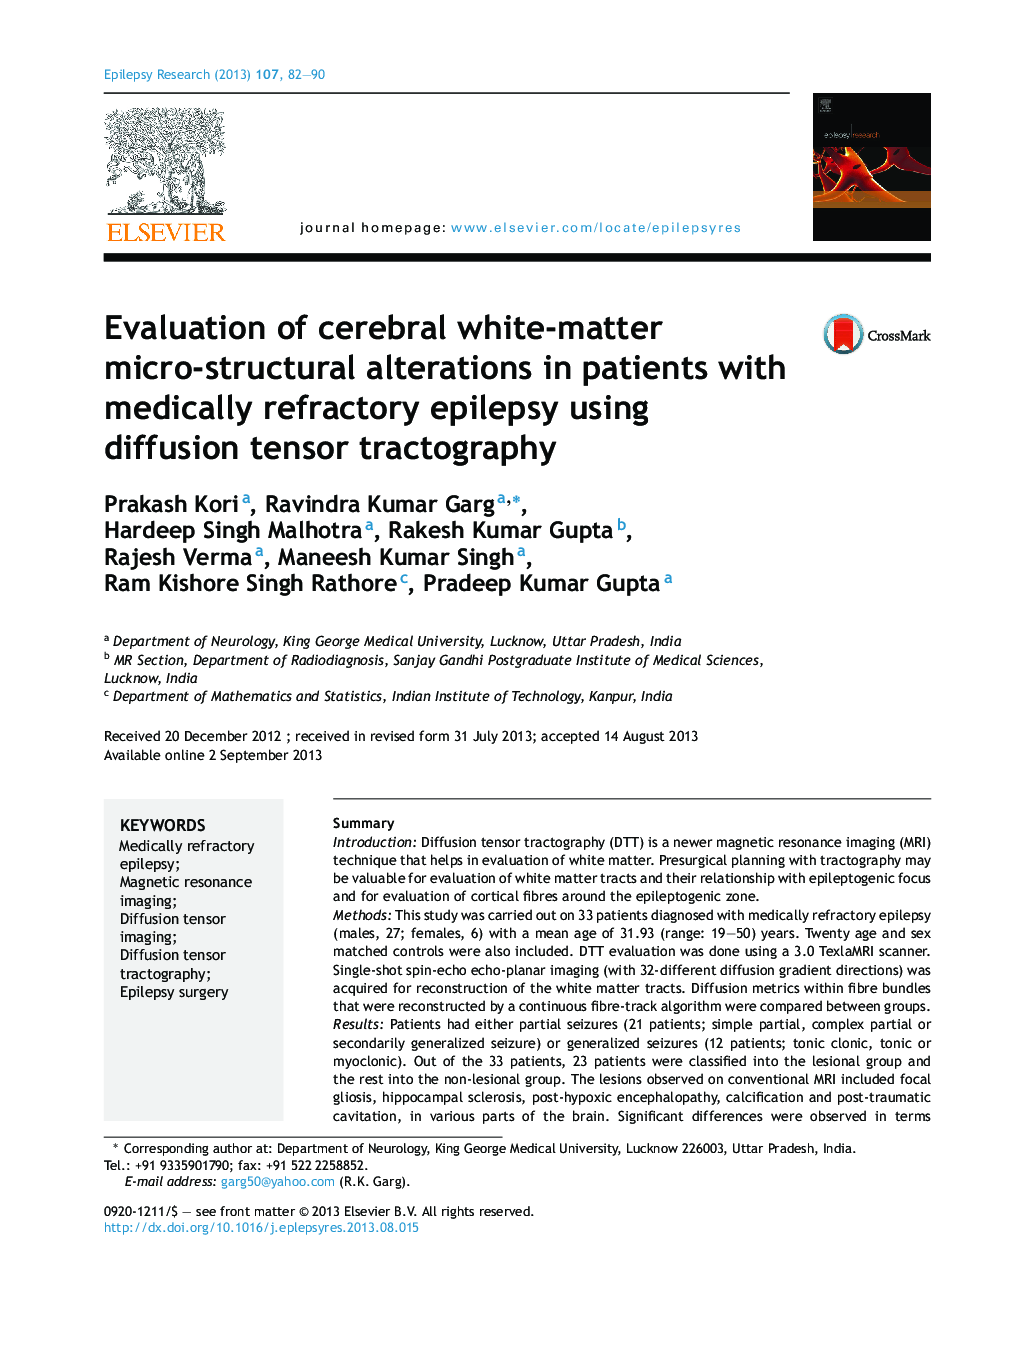 Evaluation of cerebral white-matter micro-structural alterations in patients with medically refractory epilepsy using diffusion tensor tractography